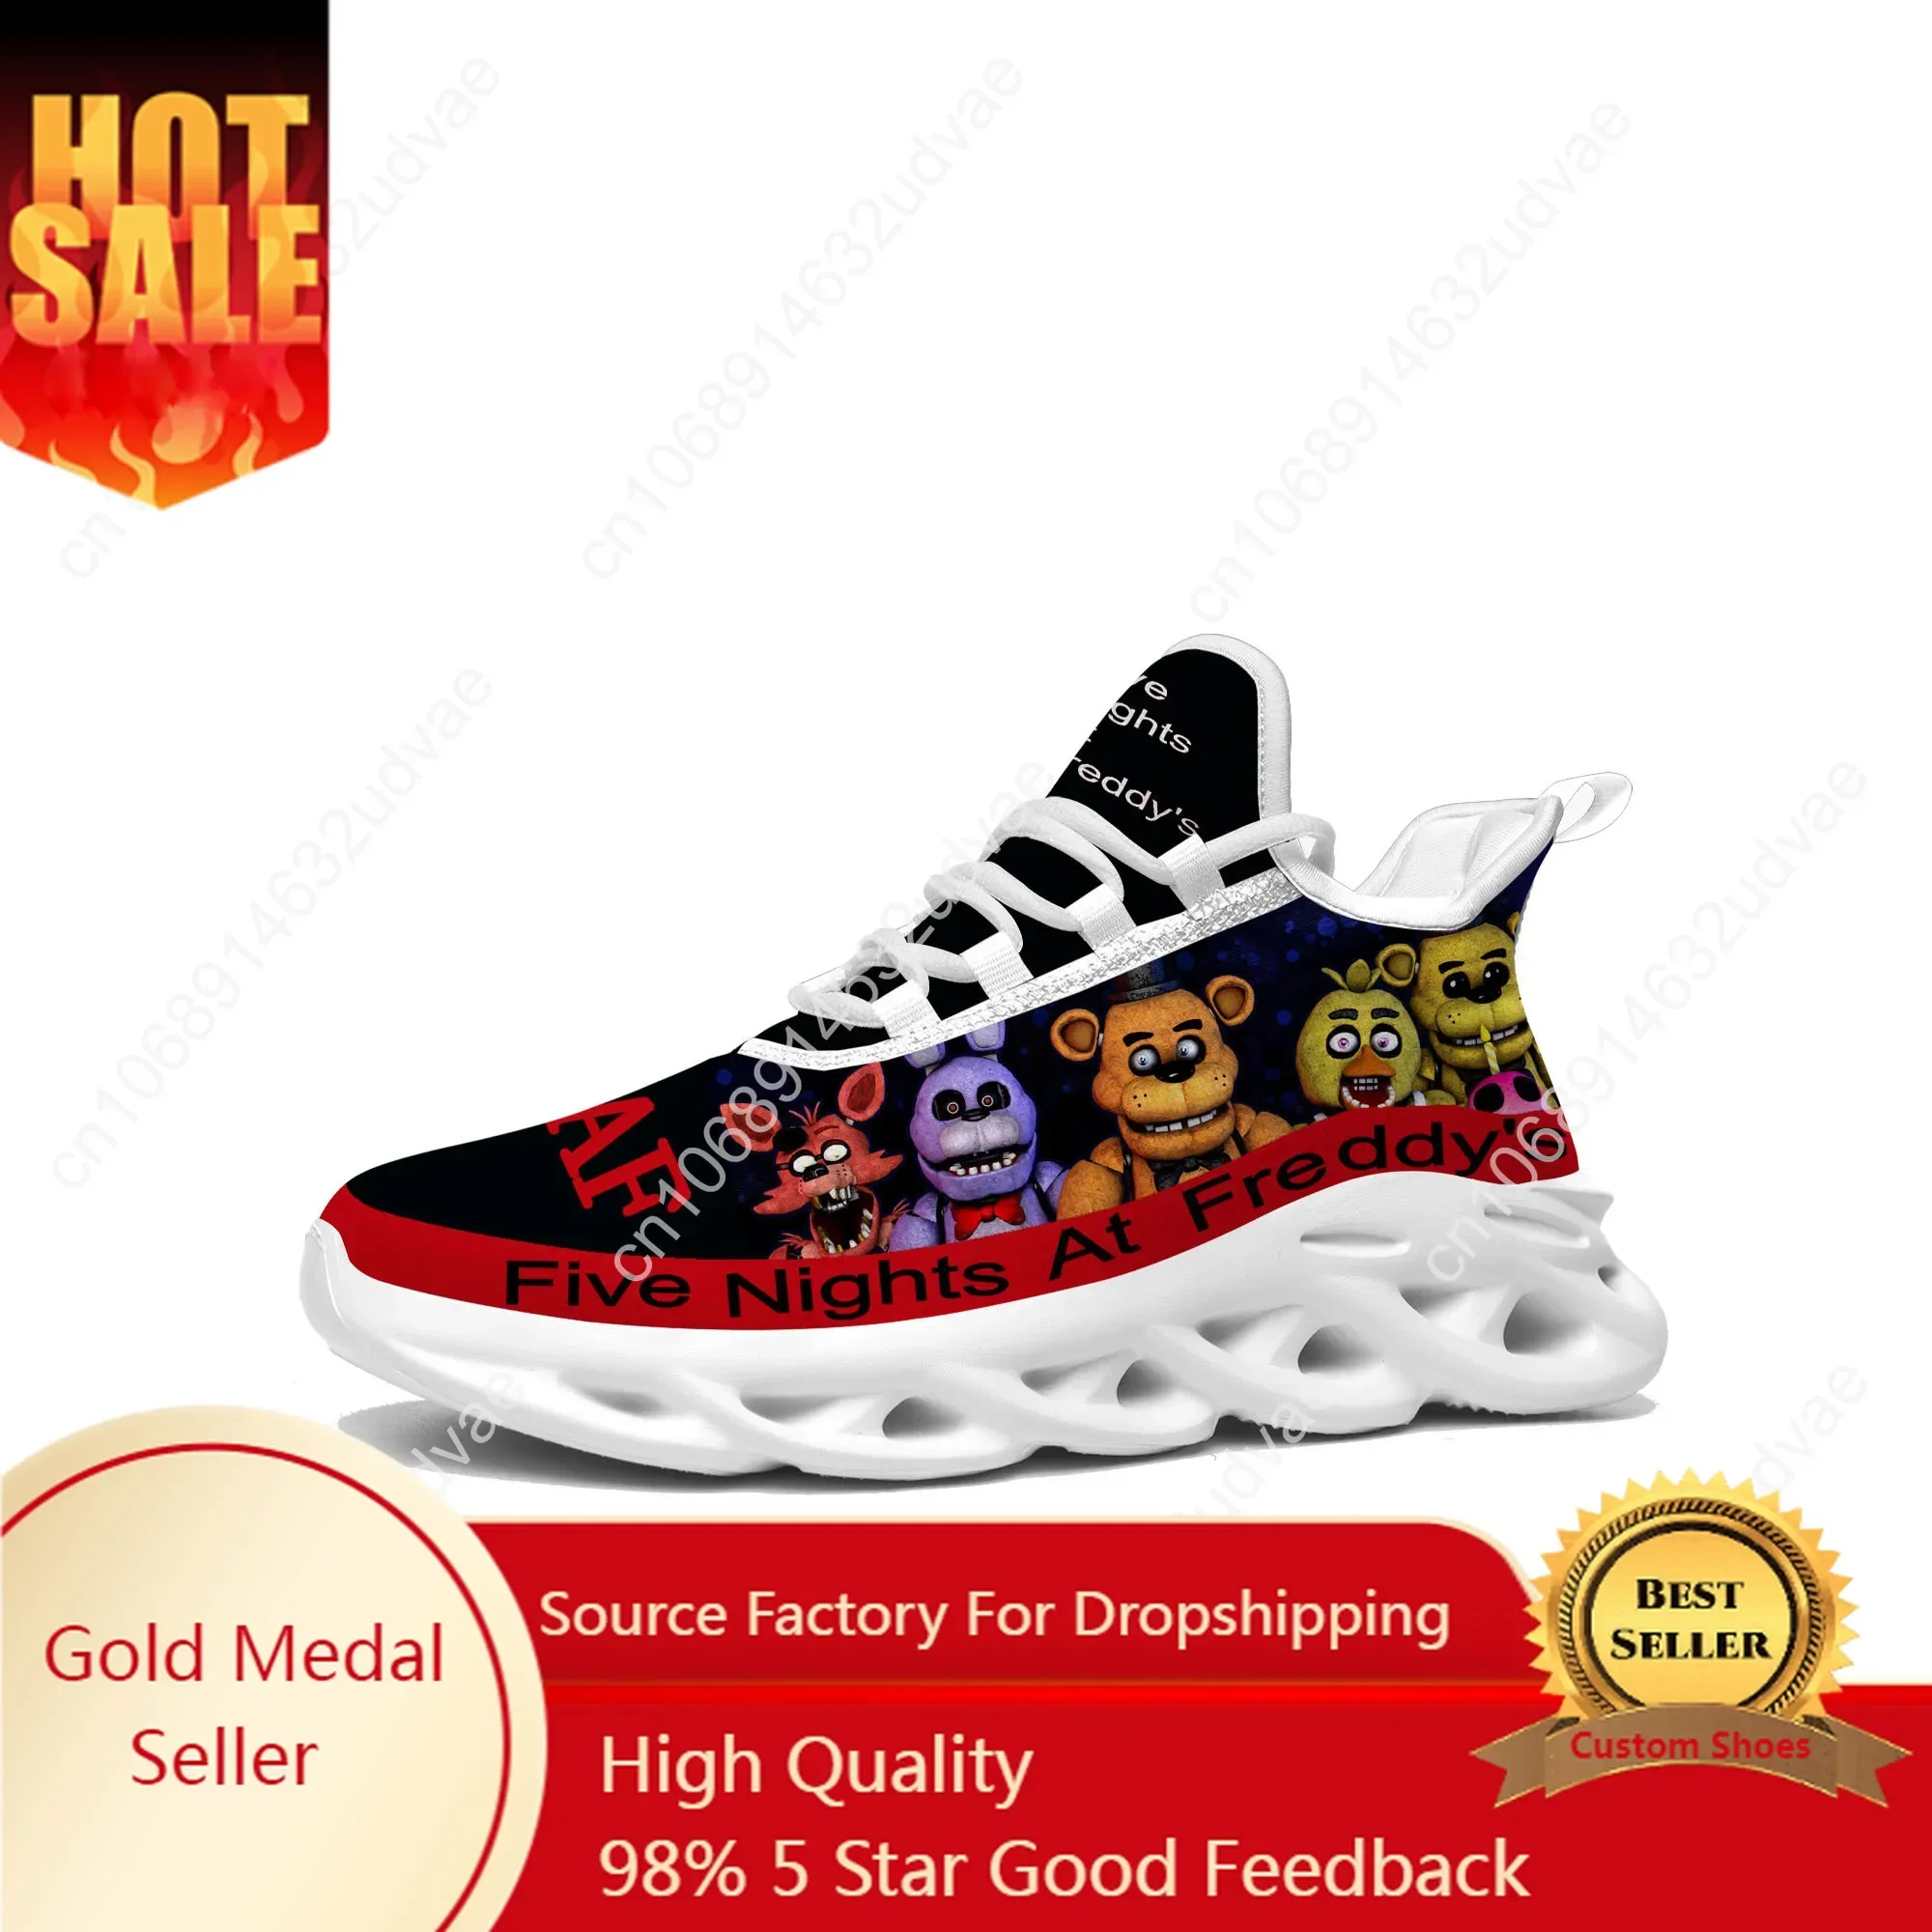 

Game N-Nights Cartoon At F-Five Manga F-Freddys Flats Sneakers Mens Womens Sports Running Shoes Sneaker Customized Made Shoe